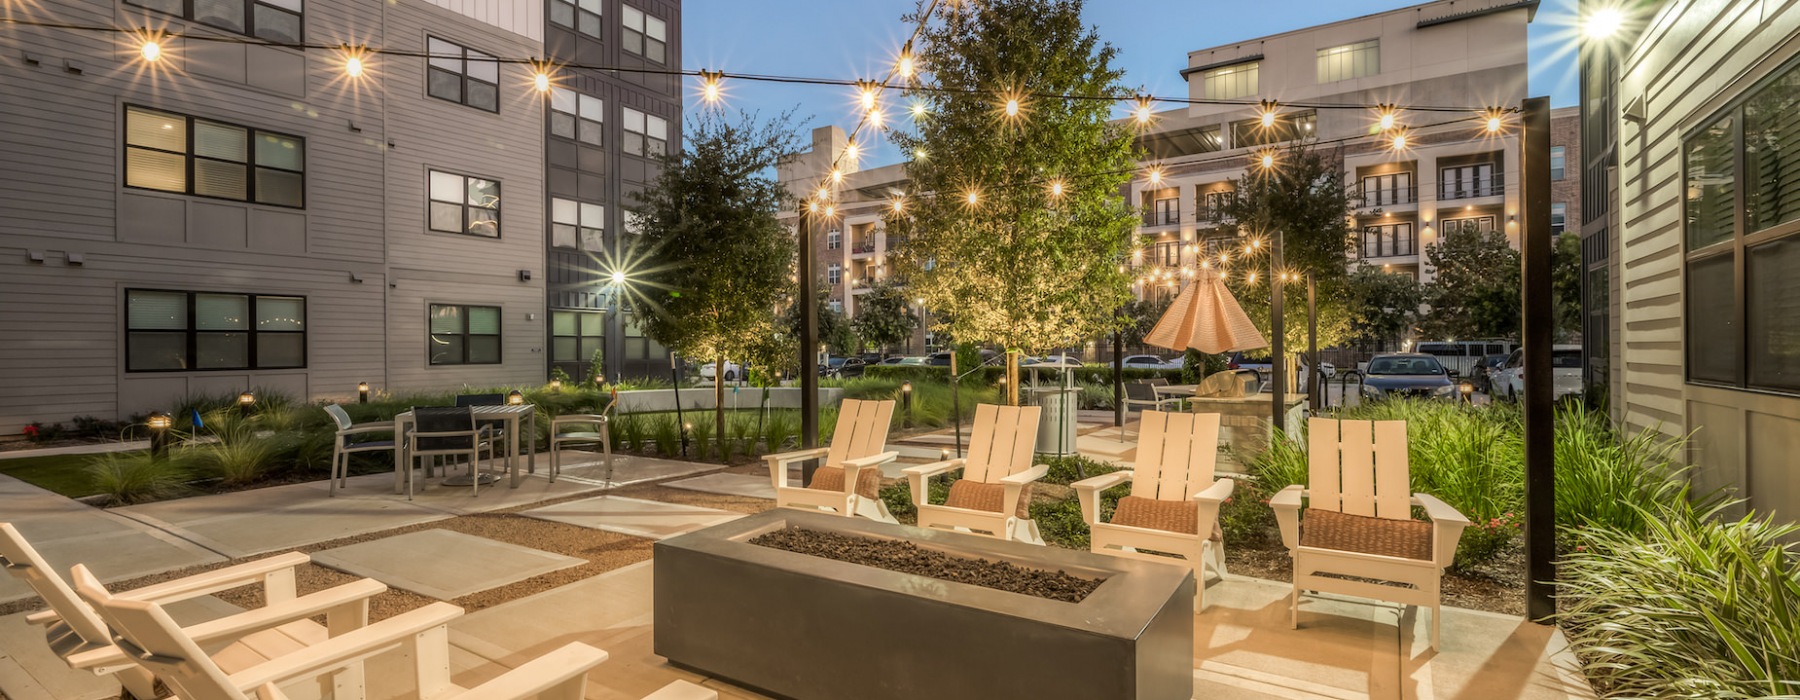 night time view of the apartment community firepit and courtyard